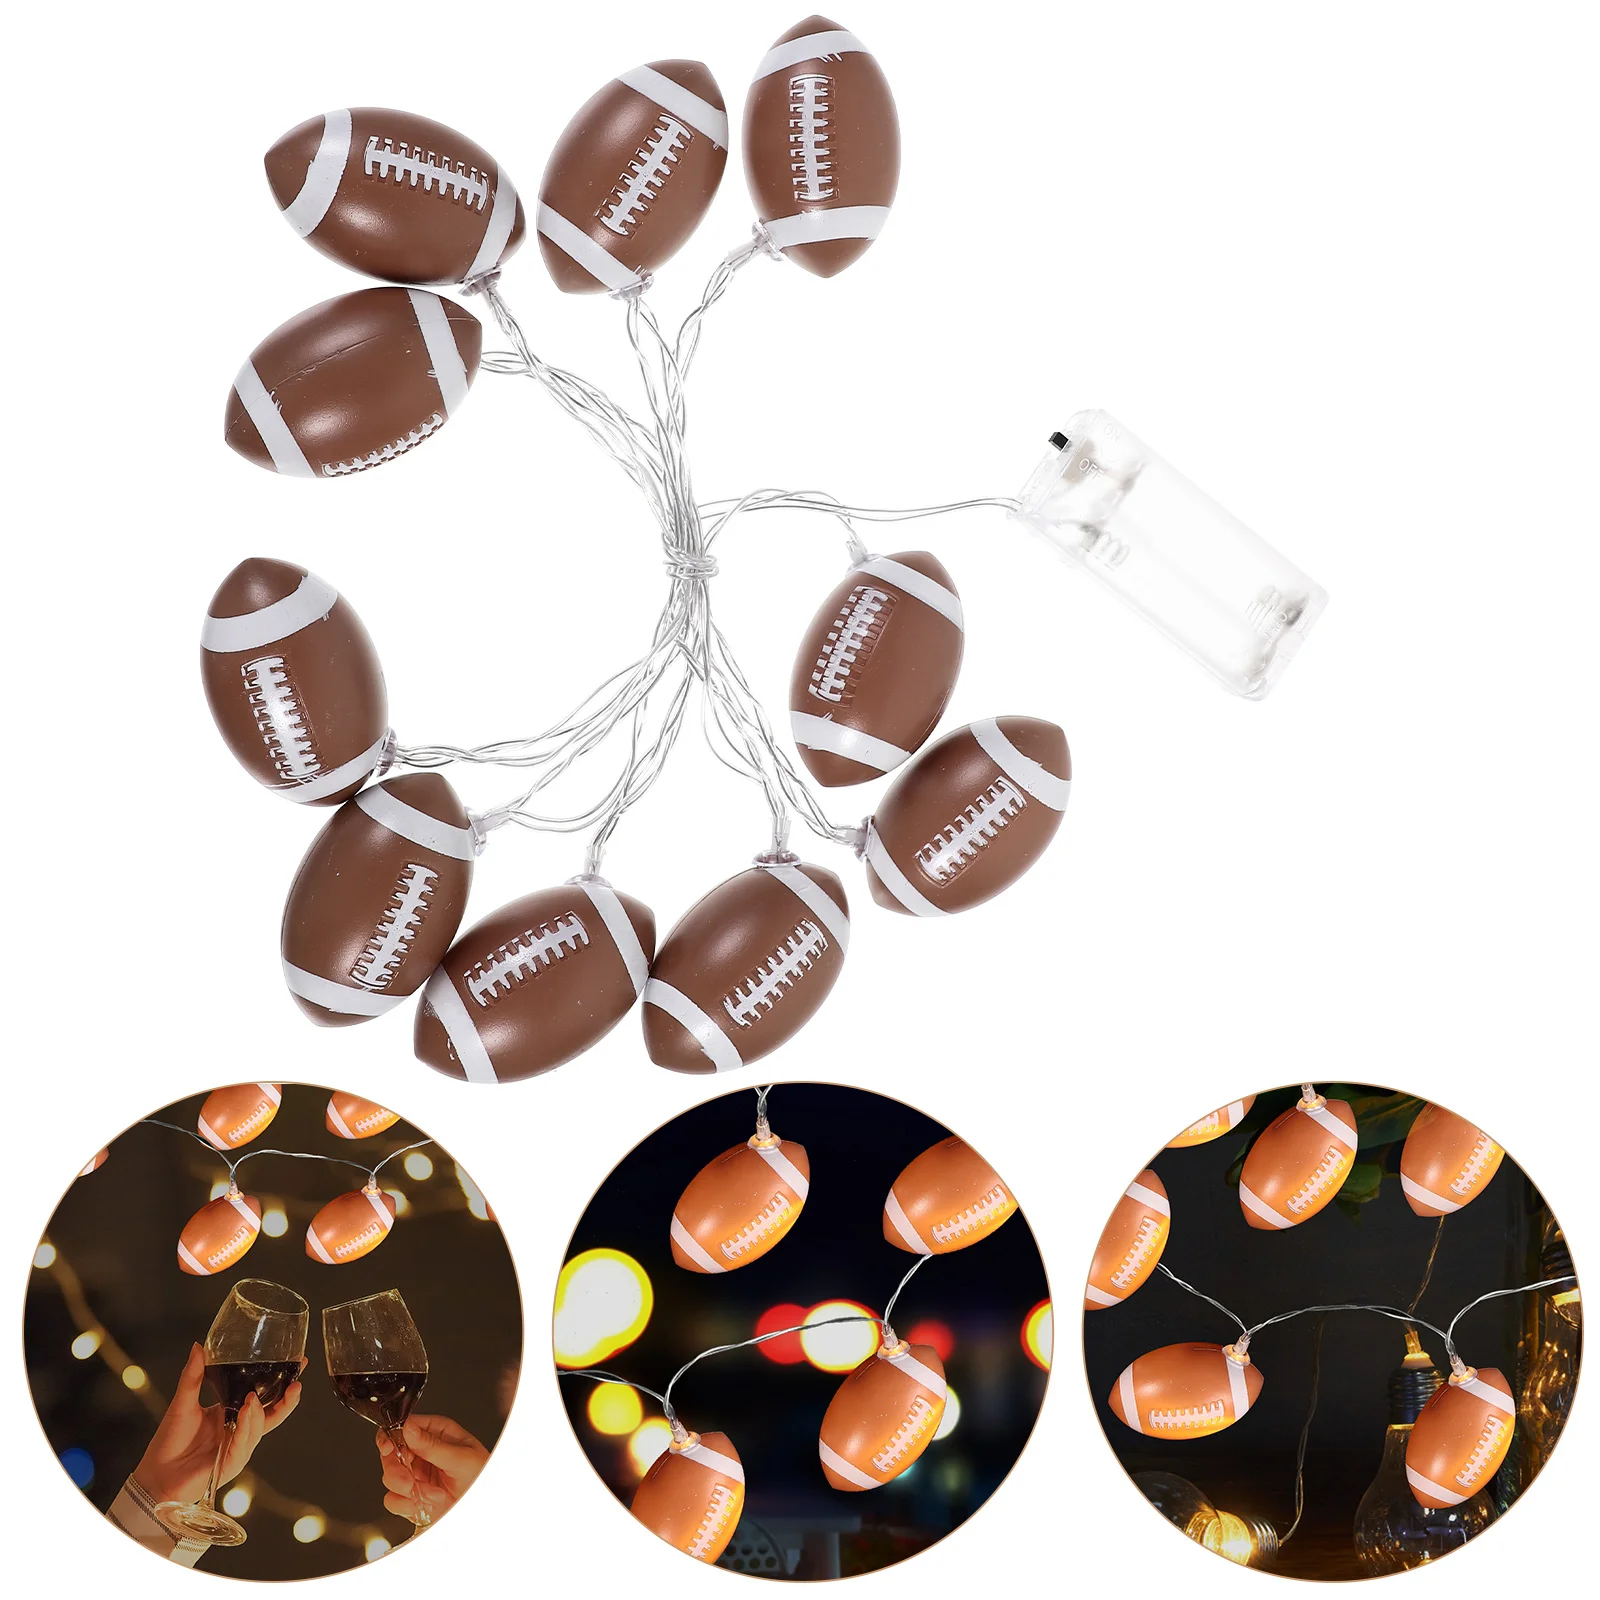 

Basketball Atmosphere Light Party Supplies Rugby Decorative Hanging Baseball Boy Sports Theme Lights Favors Supply Child